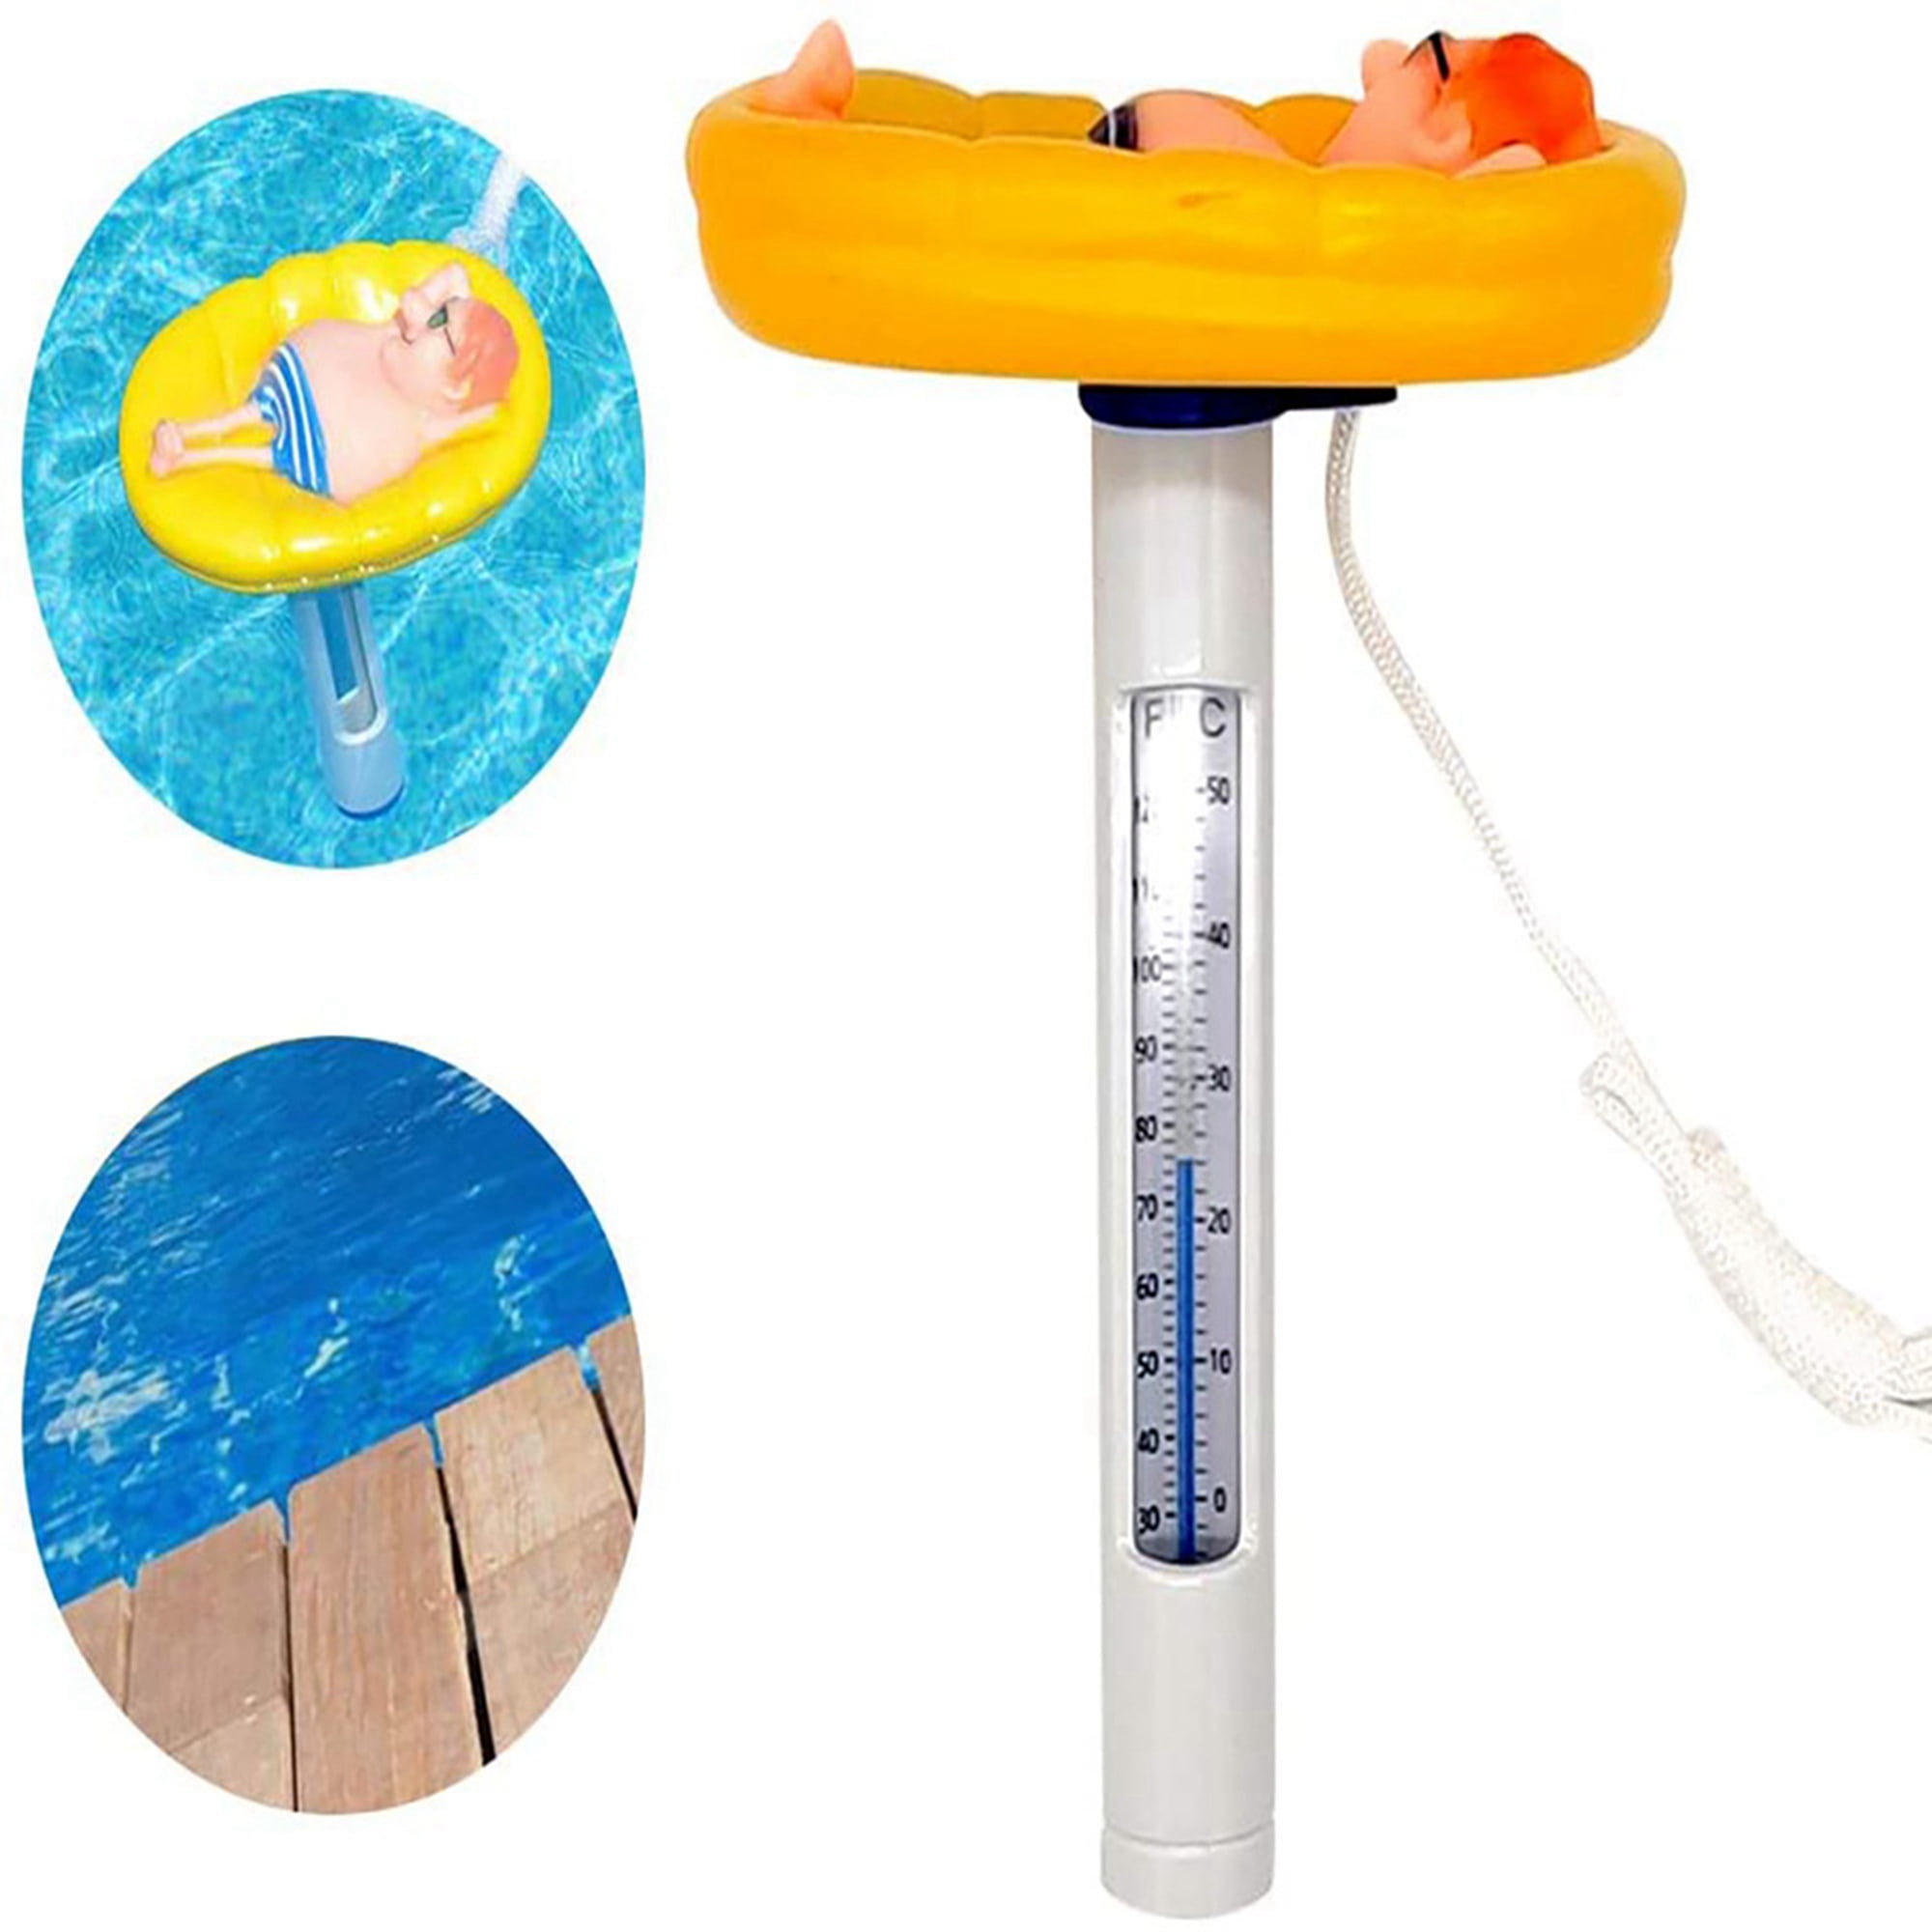 Cartoon, A Baby Indoor Outdoor Swimming Floating Pool Thermometer with Rope Cartoon Style Shatter Resistant Measuring Accessory 